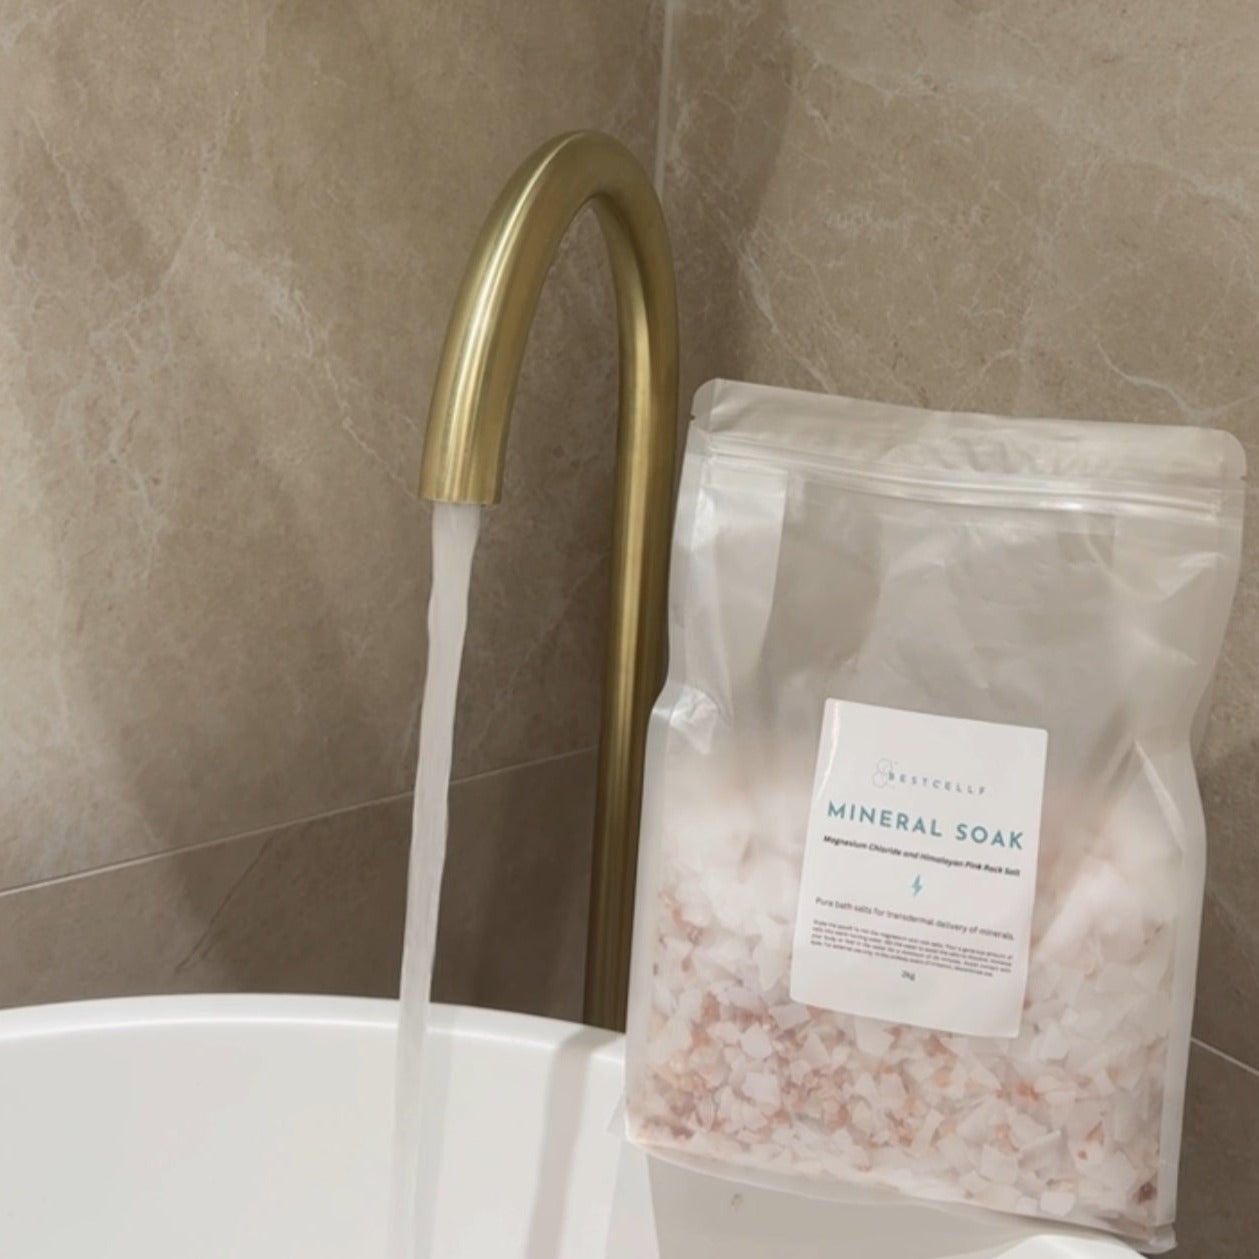 Our mineral soak is perfect for bath time or foot soaks